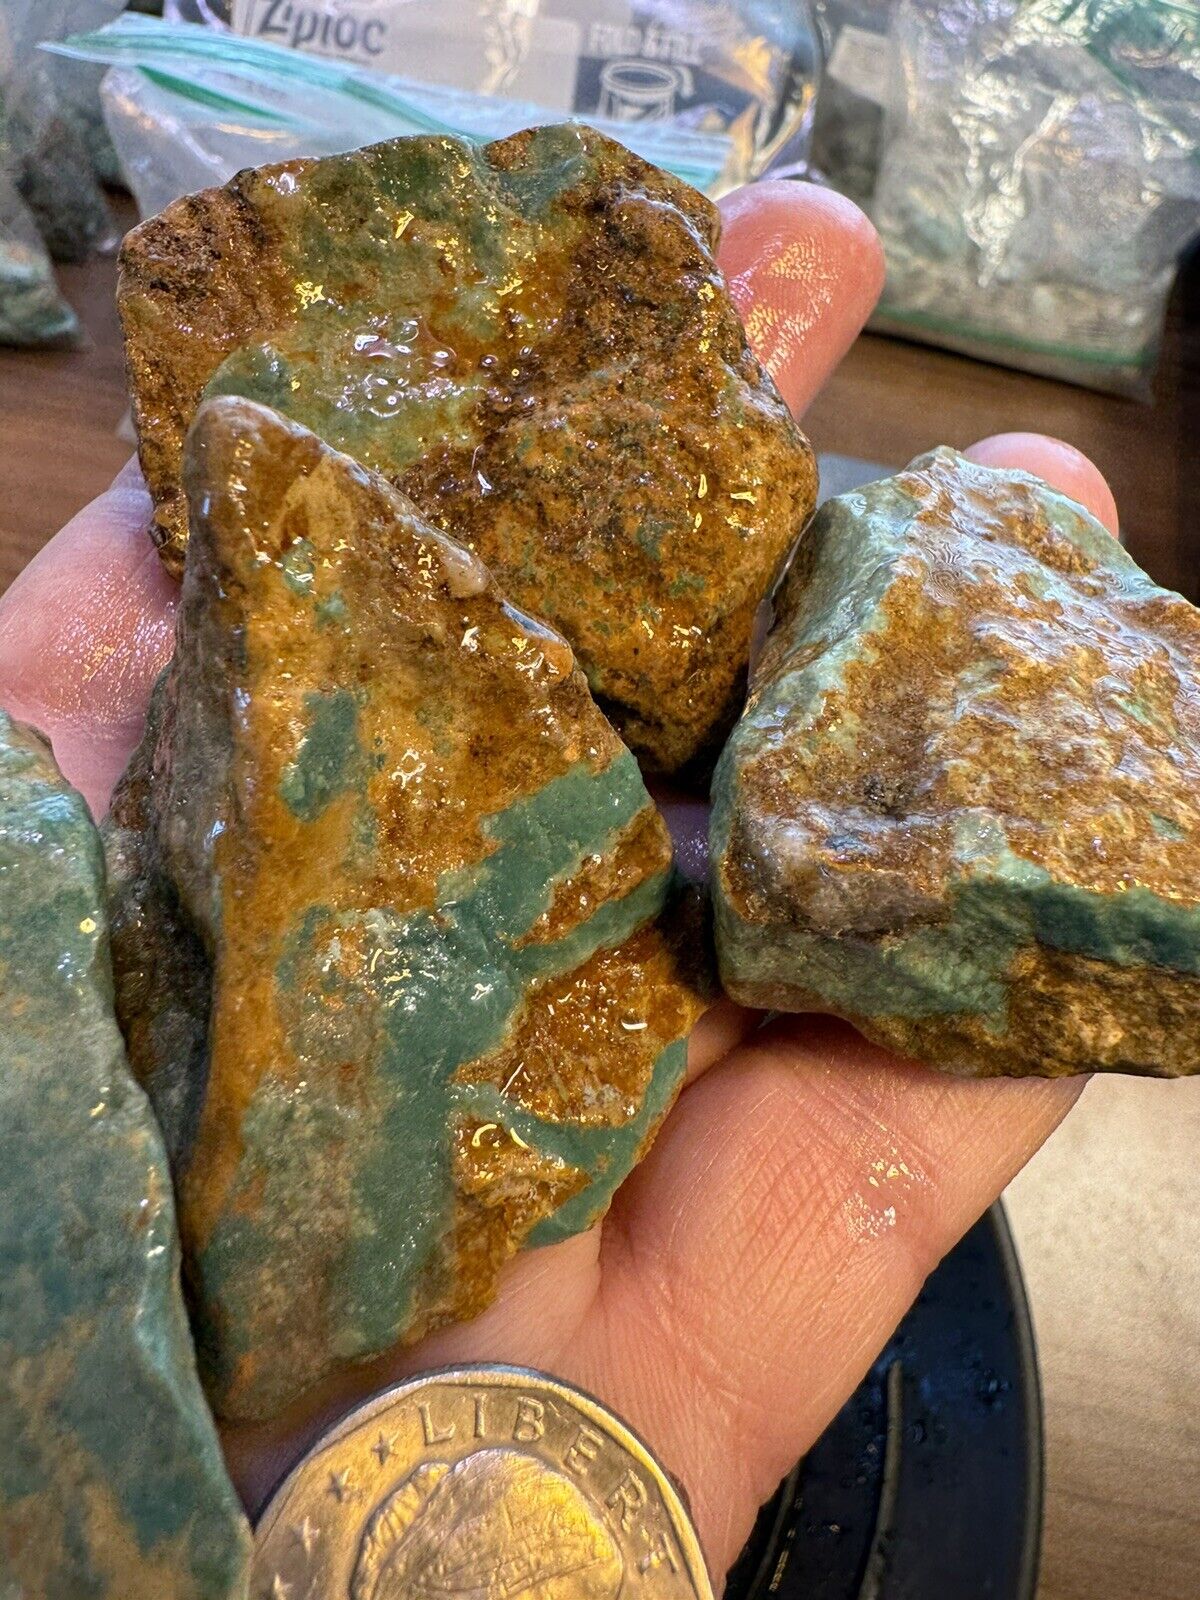 Hardy Pit Turquoise 1/4 pound Big Nuggets Super Grade Rare Green USA